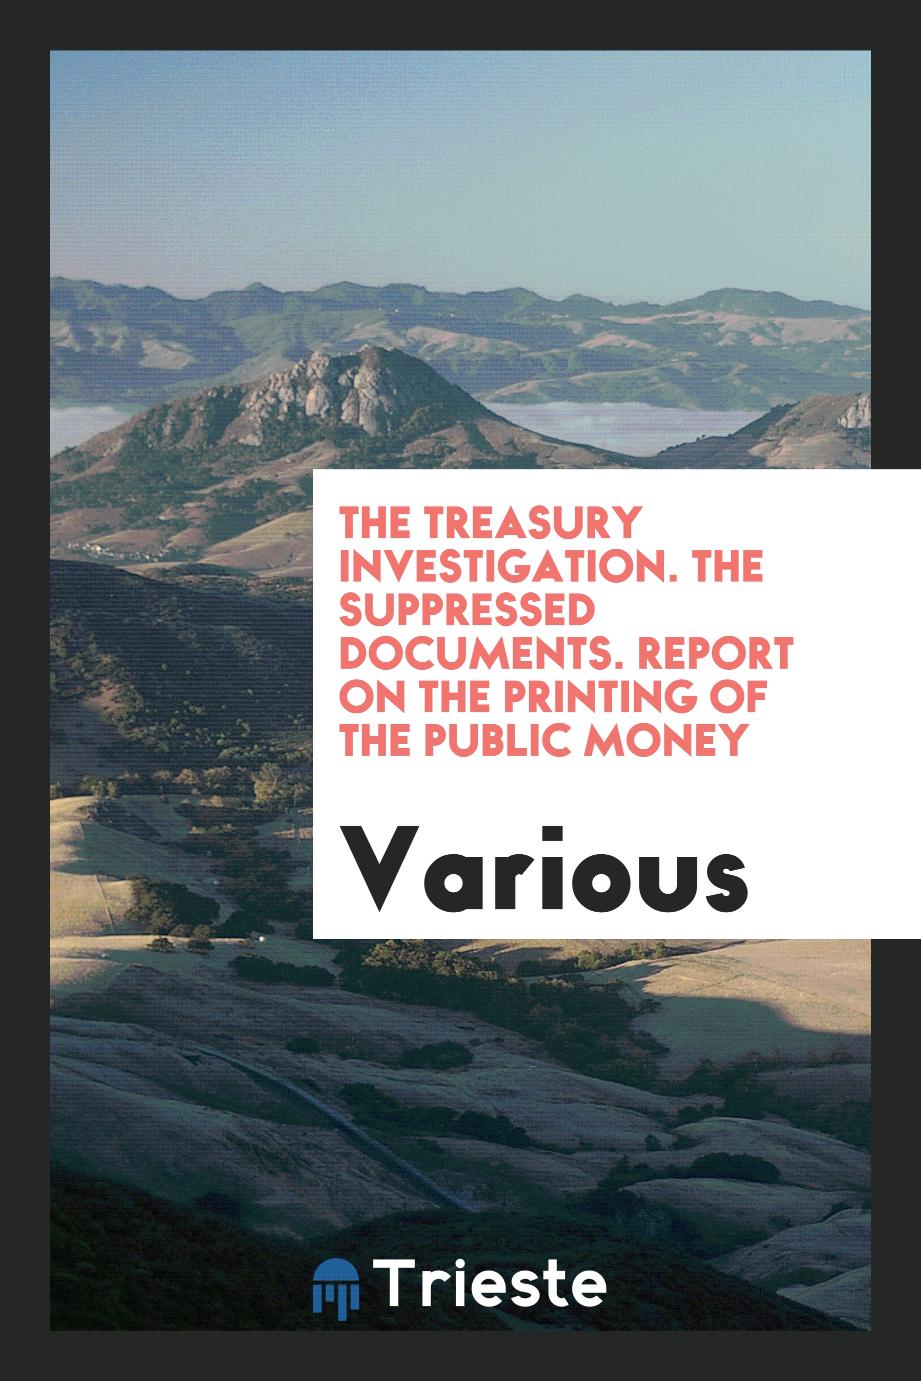 The Treasury investigation. The suppressed documents. Report on the printing of the public money